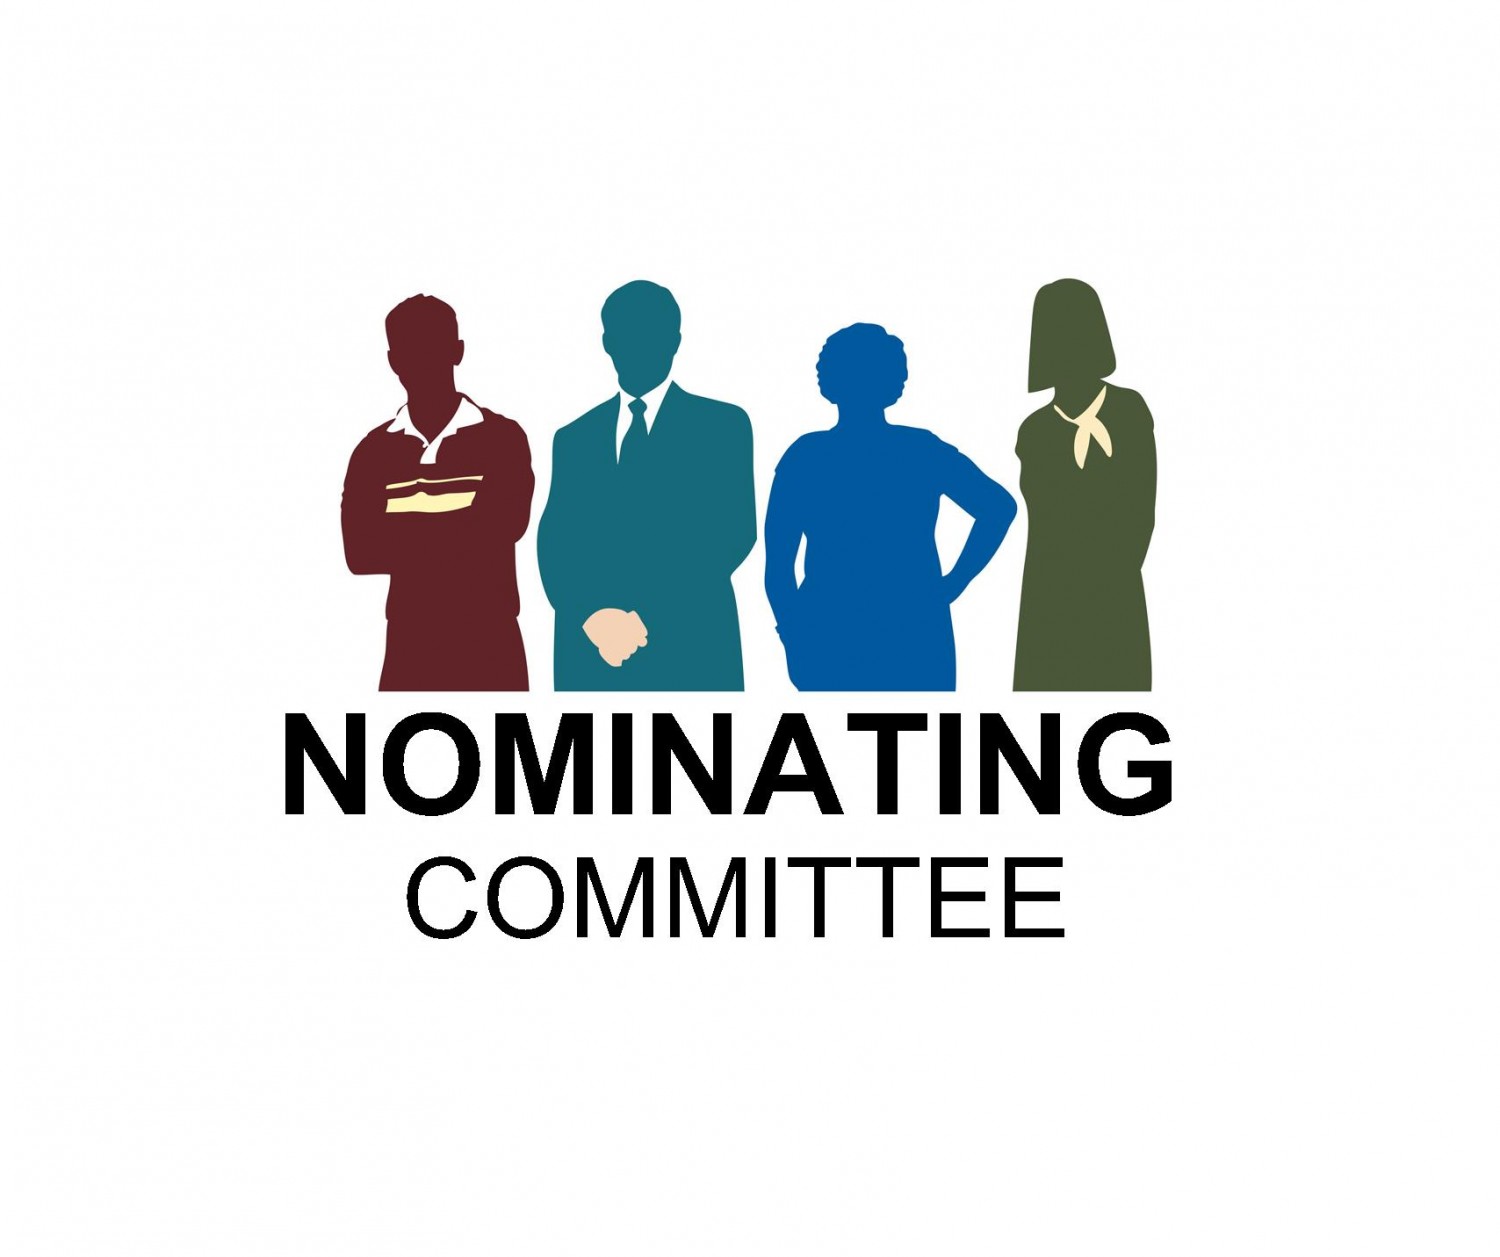 Committee Meaning and Definition